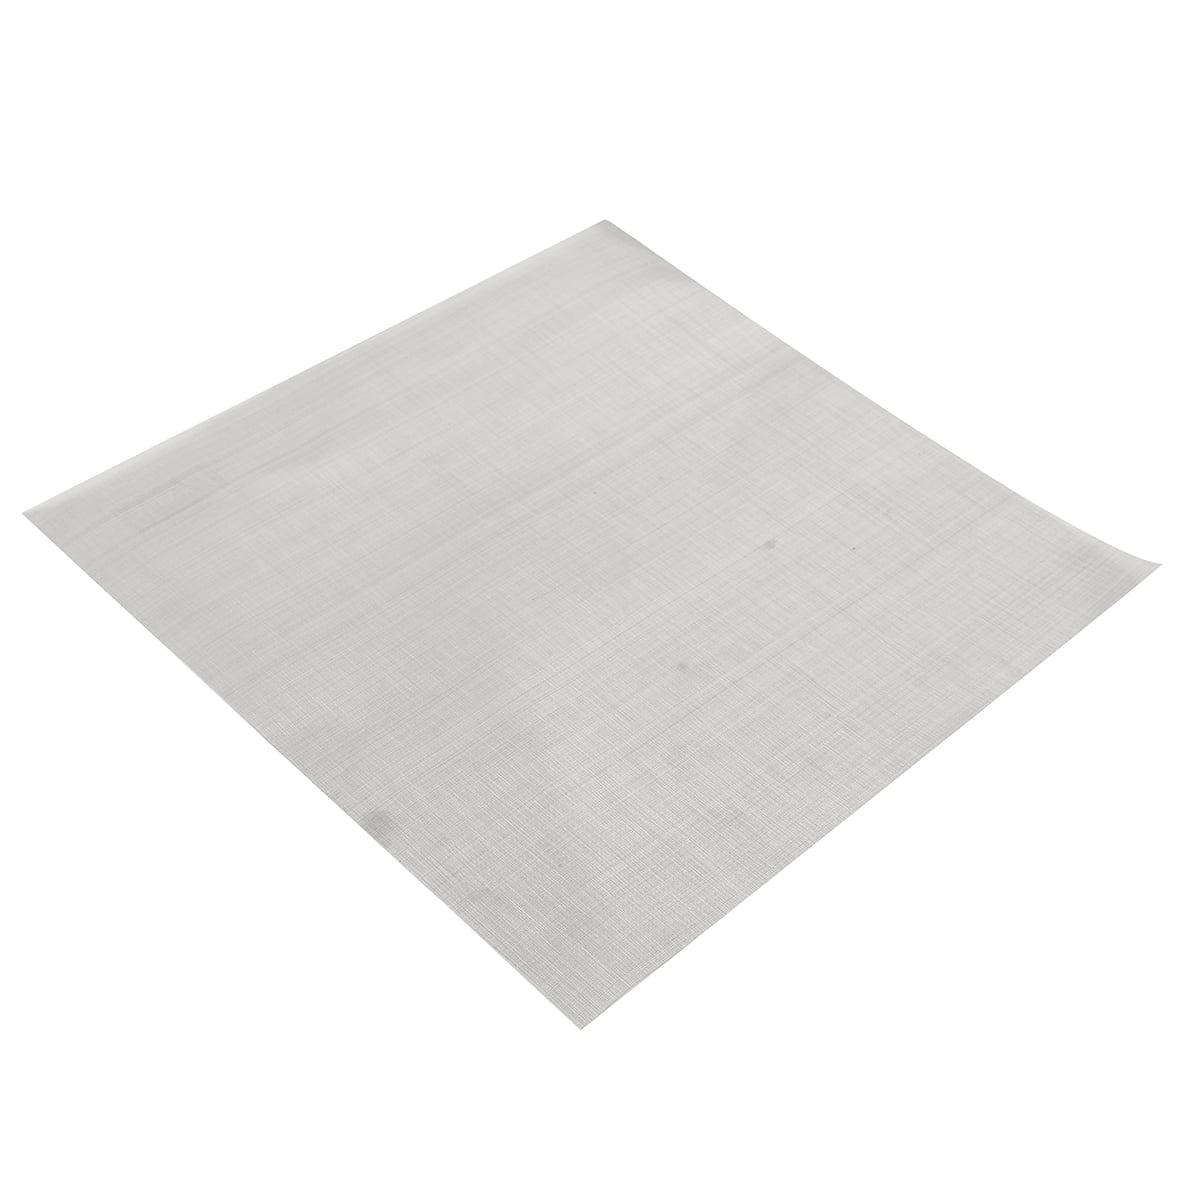 149 Microns Stainless Steel 304 Mesh #100 .0065 Wire Cloth Screen 10"x10" 